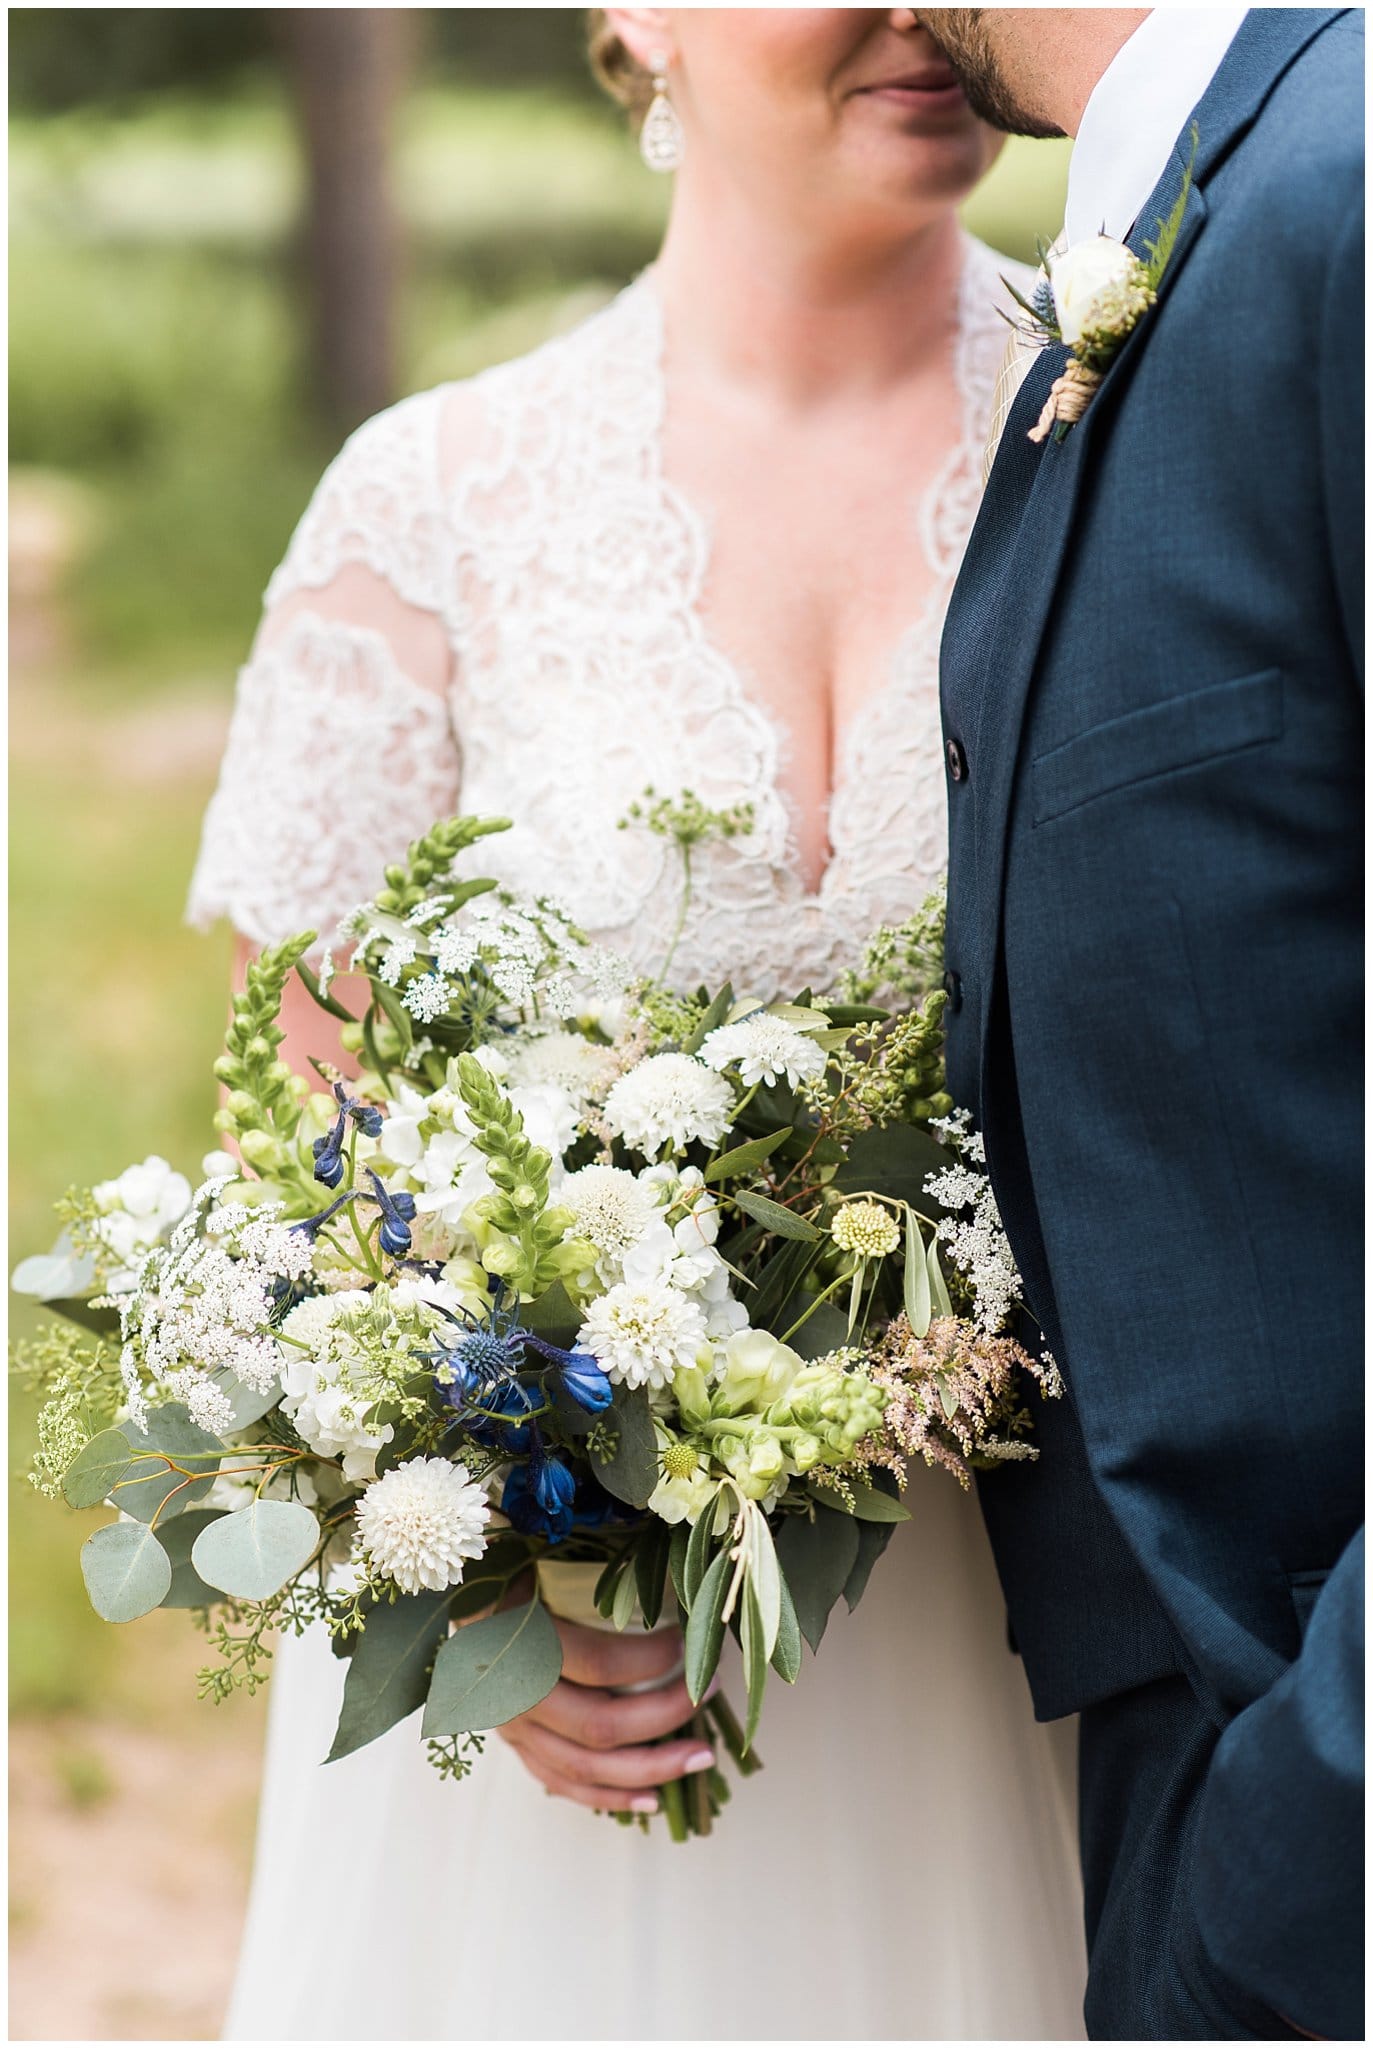 wildflower wedding bouquet at Piney River Ranch wedding by Vail Wedding photographer Jennie Crate, Photographer